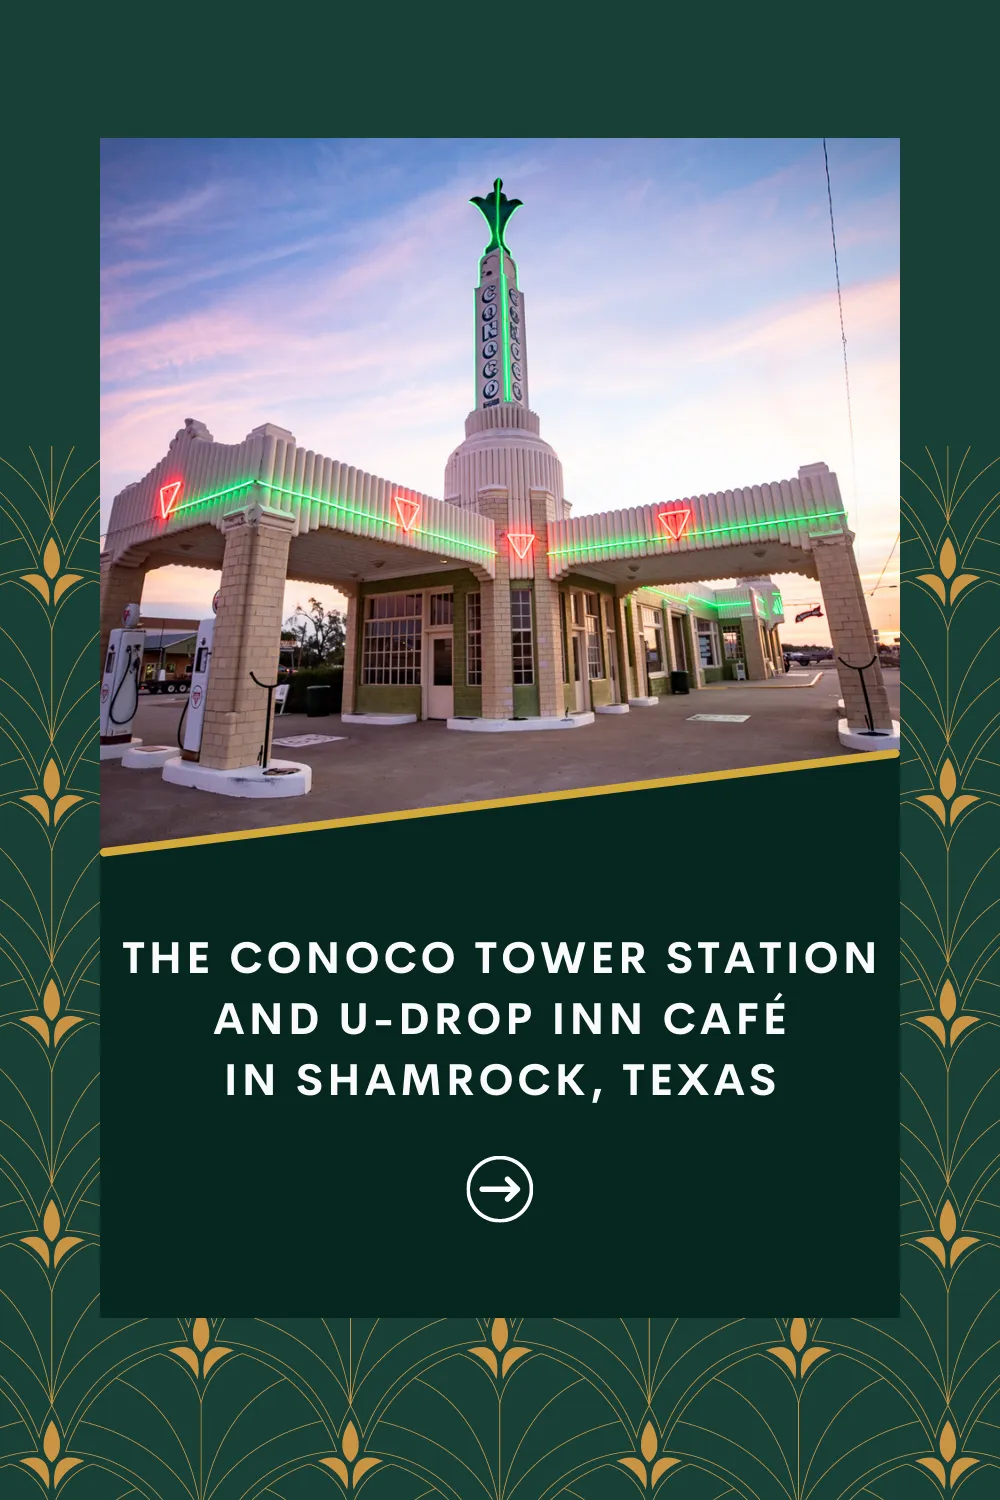 Taking a Route 66 road trip? Be sure to drop in to this iconic attraction: the Conoco Tower Station and U-Drop Inn Café in Shamrock, Texas. The art deco building is a must see for any travel itinerary for a Texas road trip.  #RoadTrips #RoadTripStop #Route66 #Route66RoadTrip #TexasRoute66 #Texas #TexasRoadTrip #TexasRoadsideAttractions #RoadsideAttractions #RoadsideAttraction #RoadsideAmerica #RoadTrip 